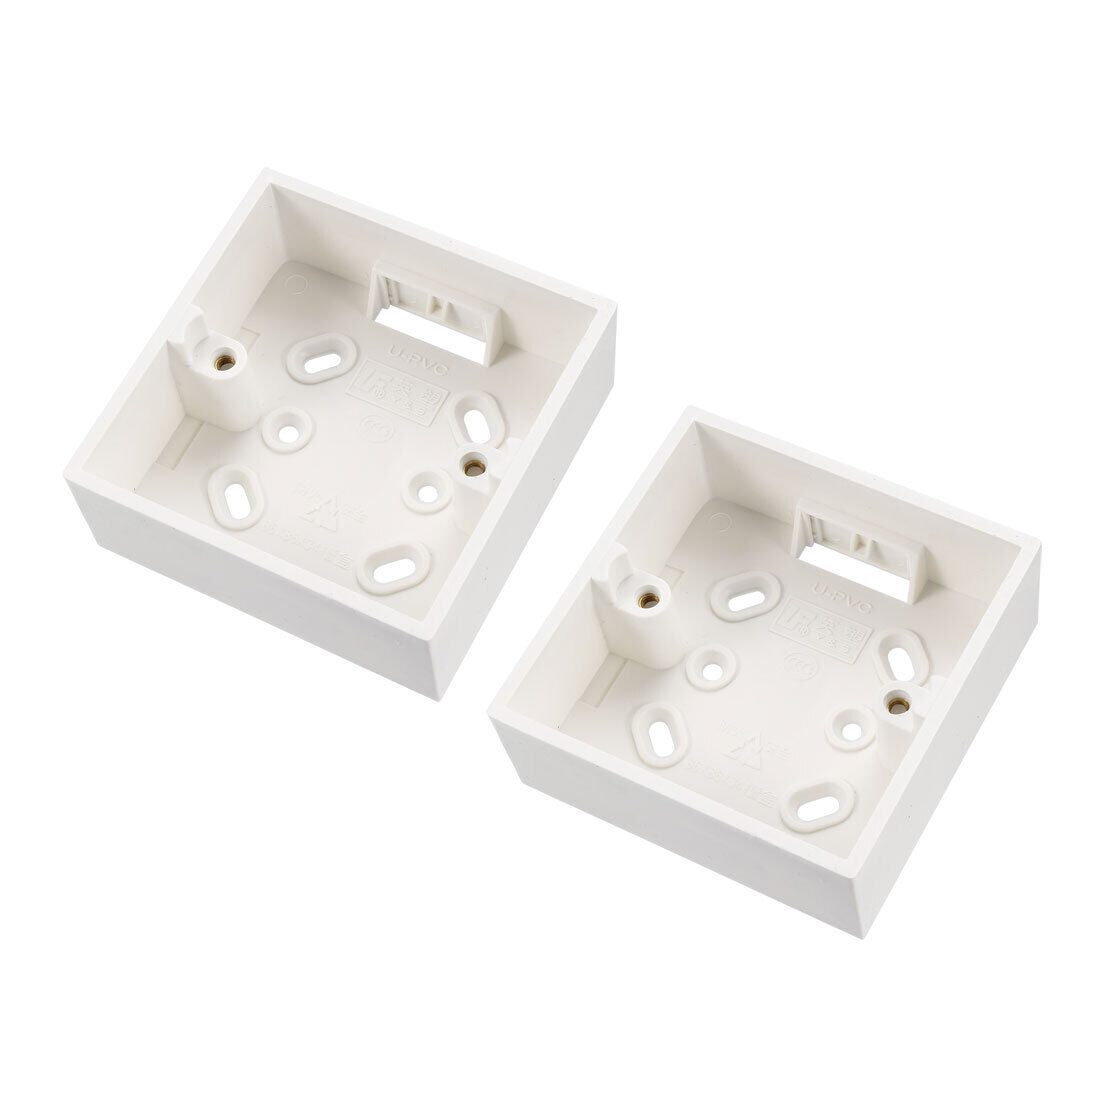 2pcs Wall Switch Box Electrical Outlet Mounting Cassette Single Gang